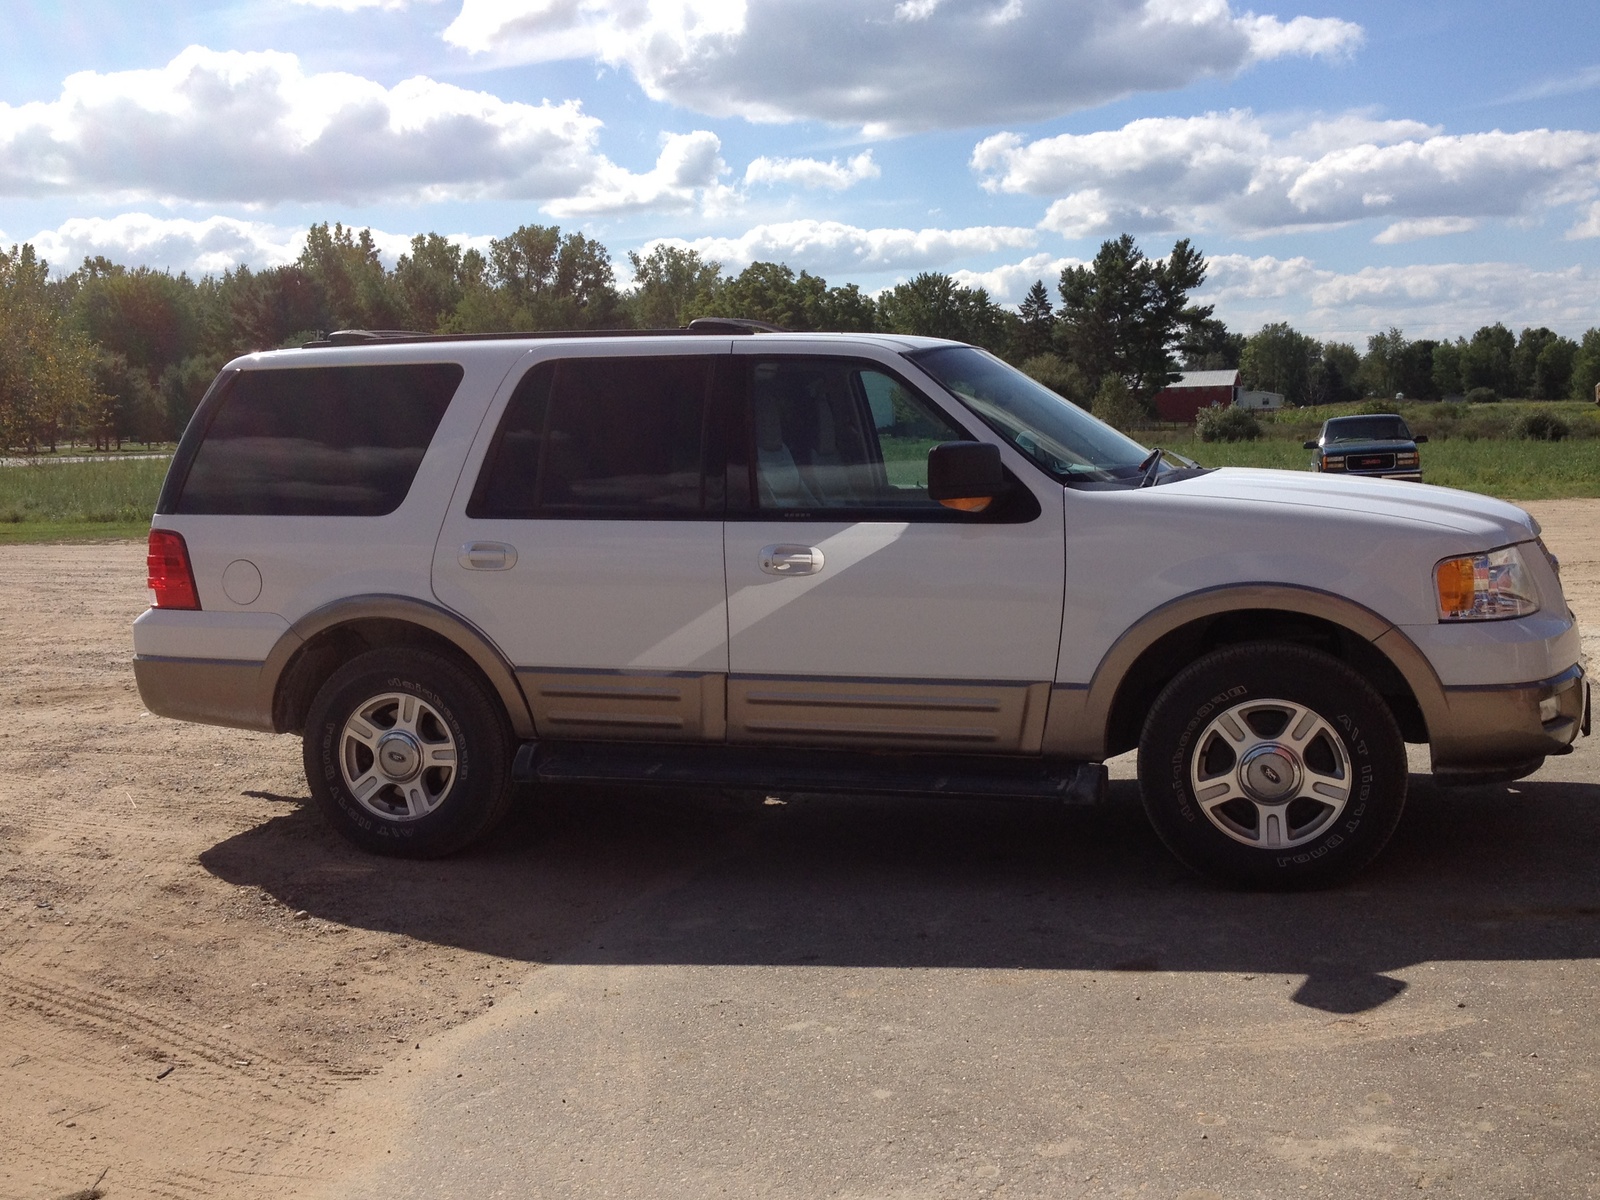 2003 Ford expedition wikipedia #4